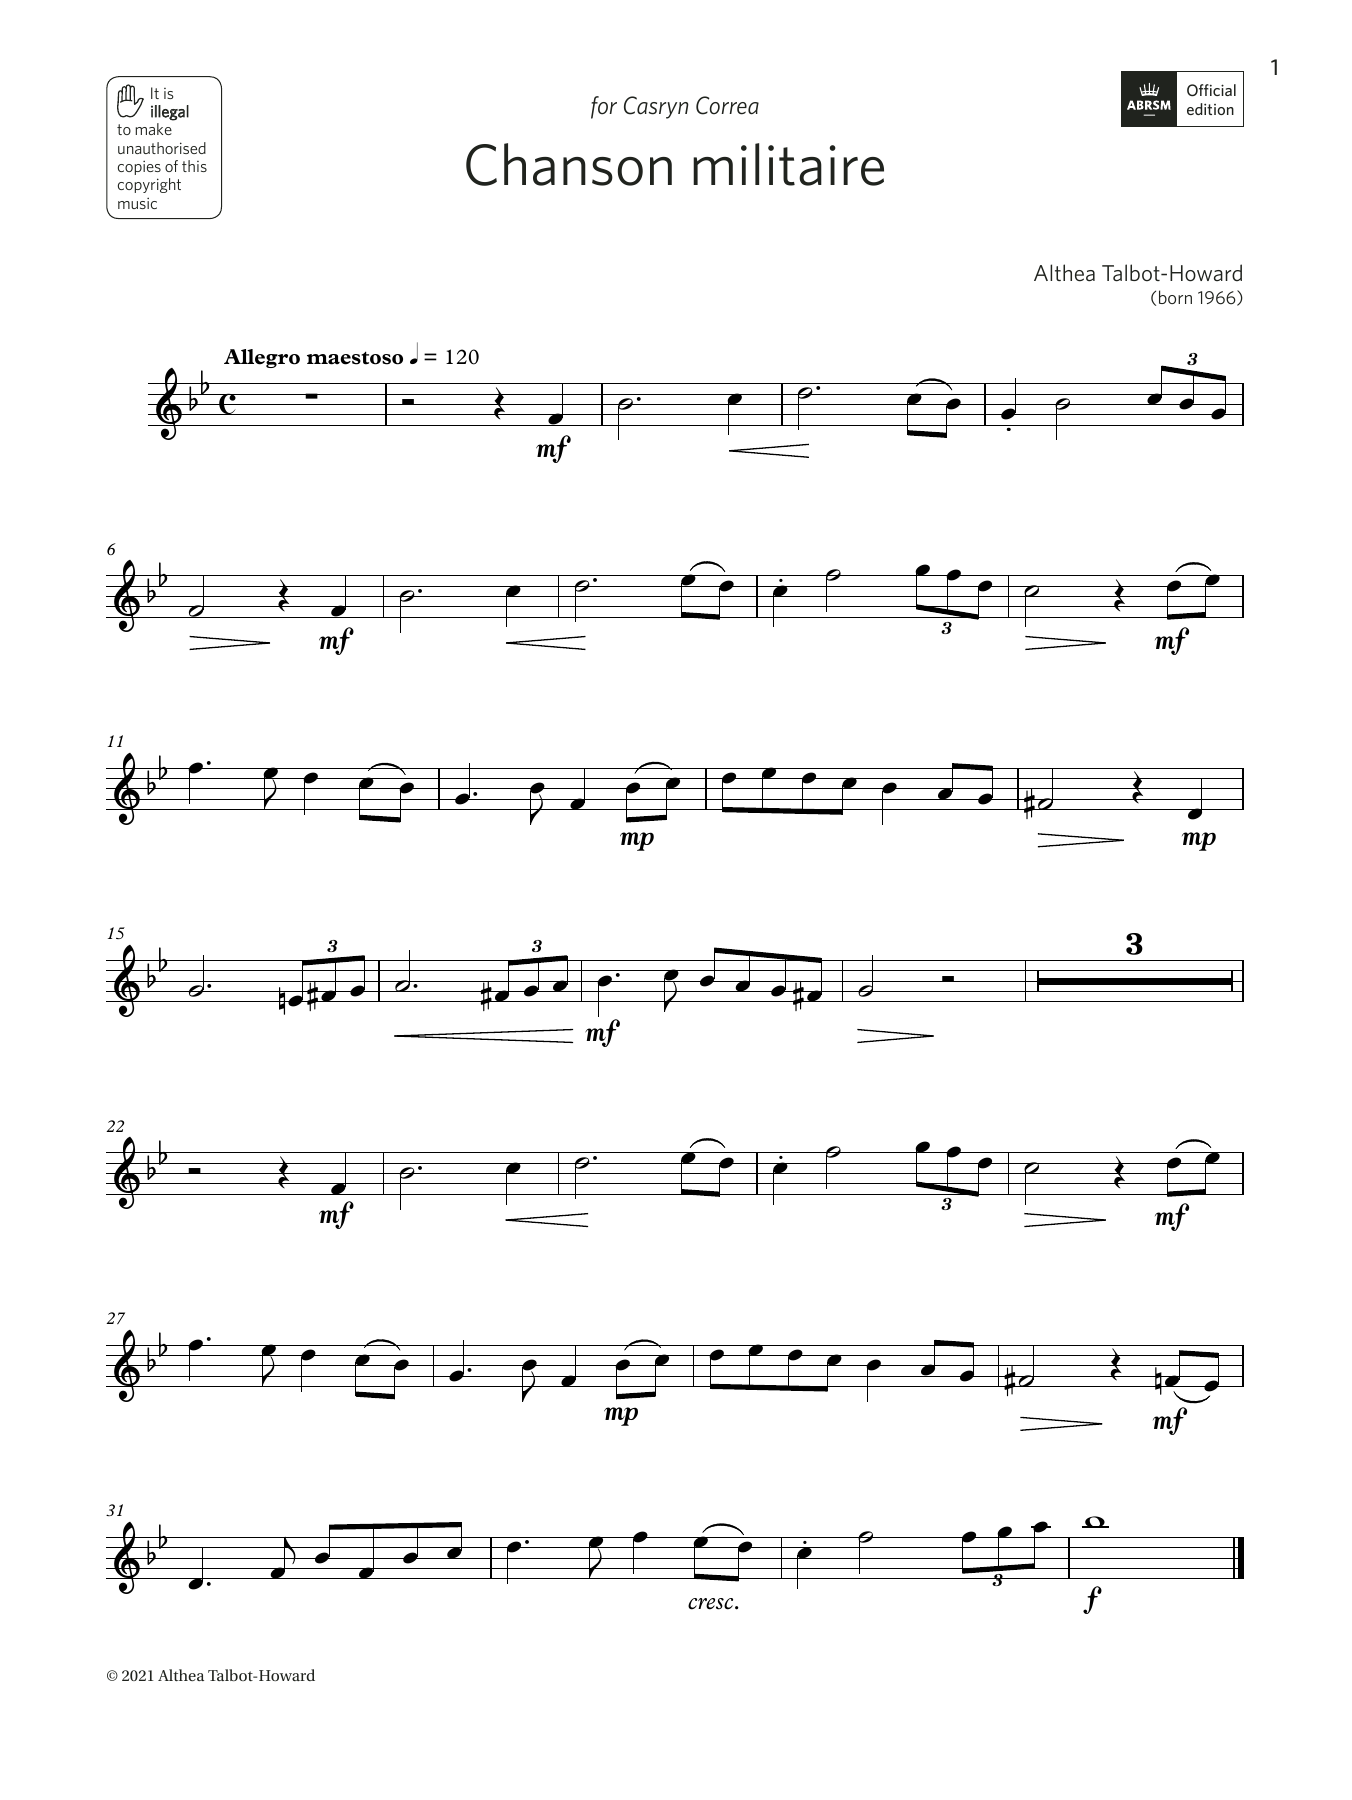 Althea Talbot-Howard Chanson Militaire (Grade 3 List A8 from the ABRSM Oboe syllabus from 2022) sheet music notes and chords. Download Printable PDF.